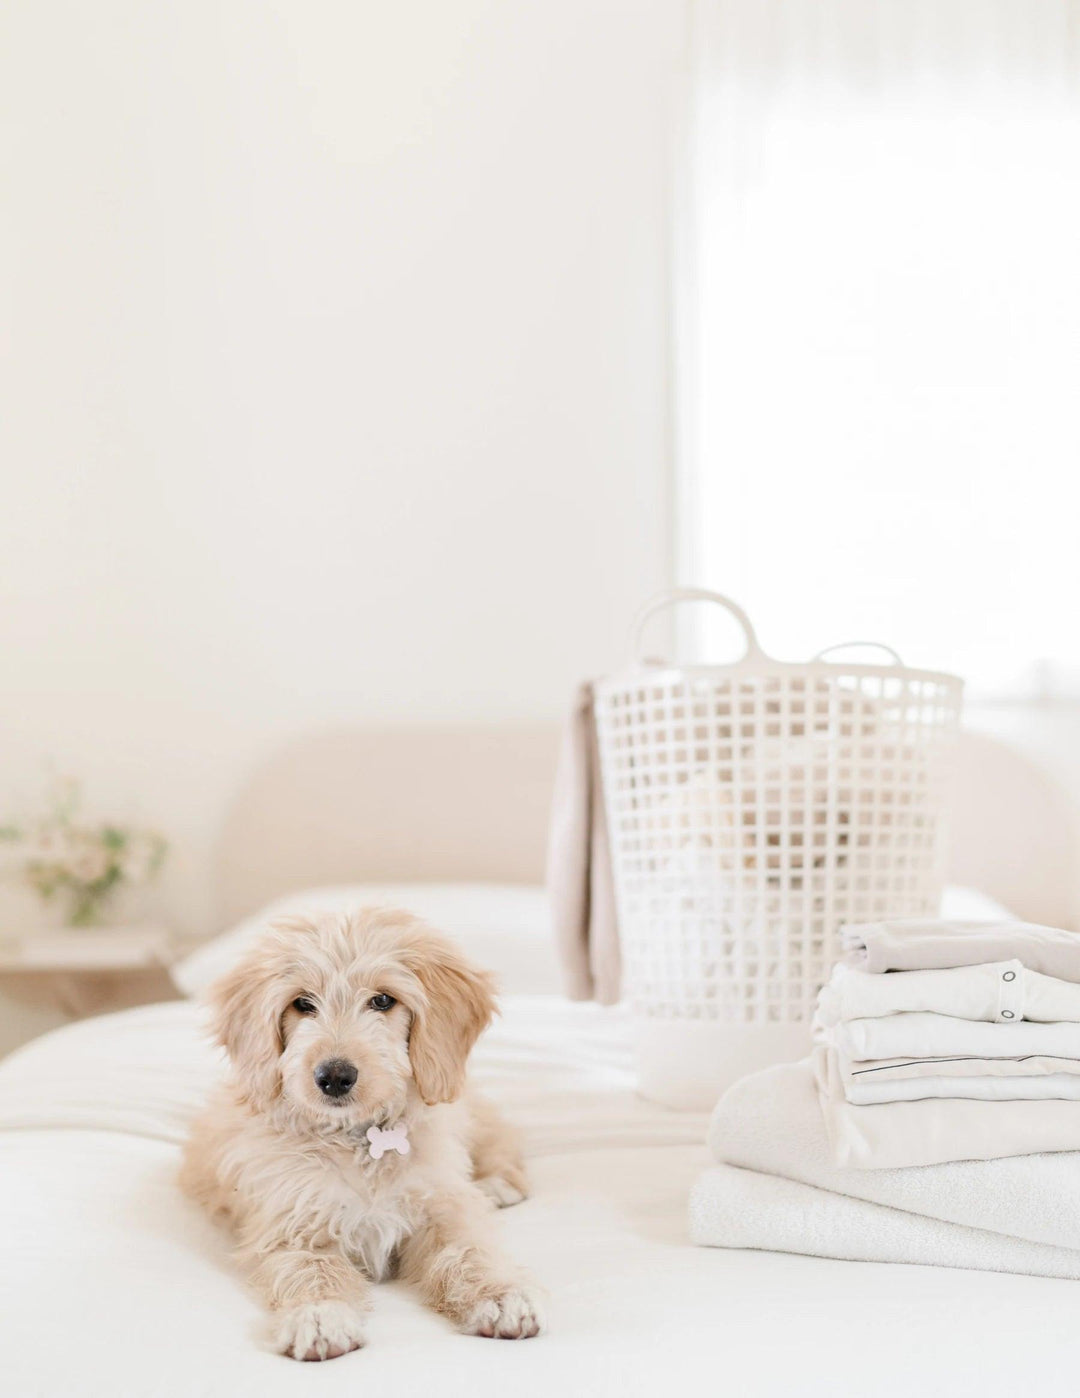 Pet/Animal Photography Contract Checklist - TheLawTog®